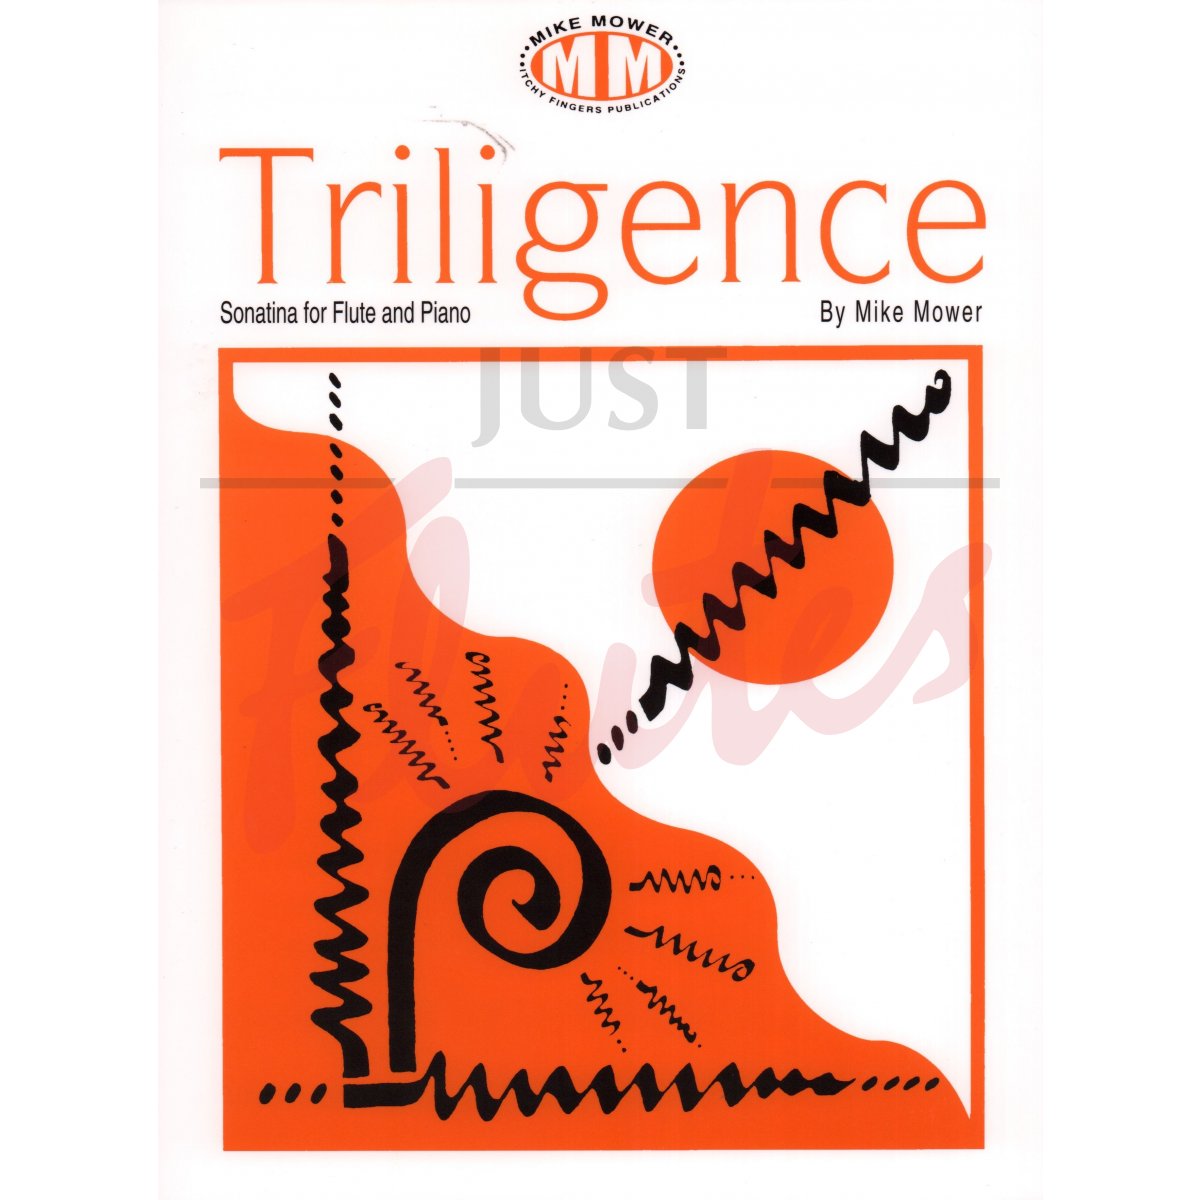 Triligence for Flute and Piano